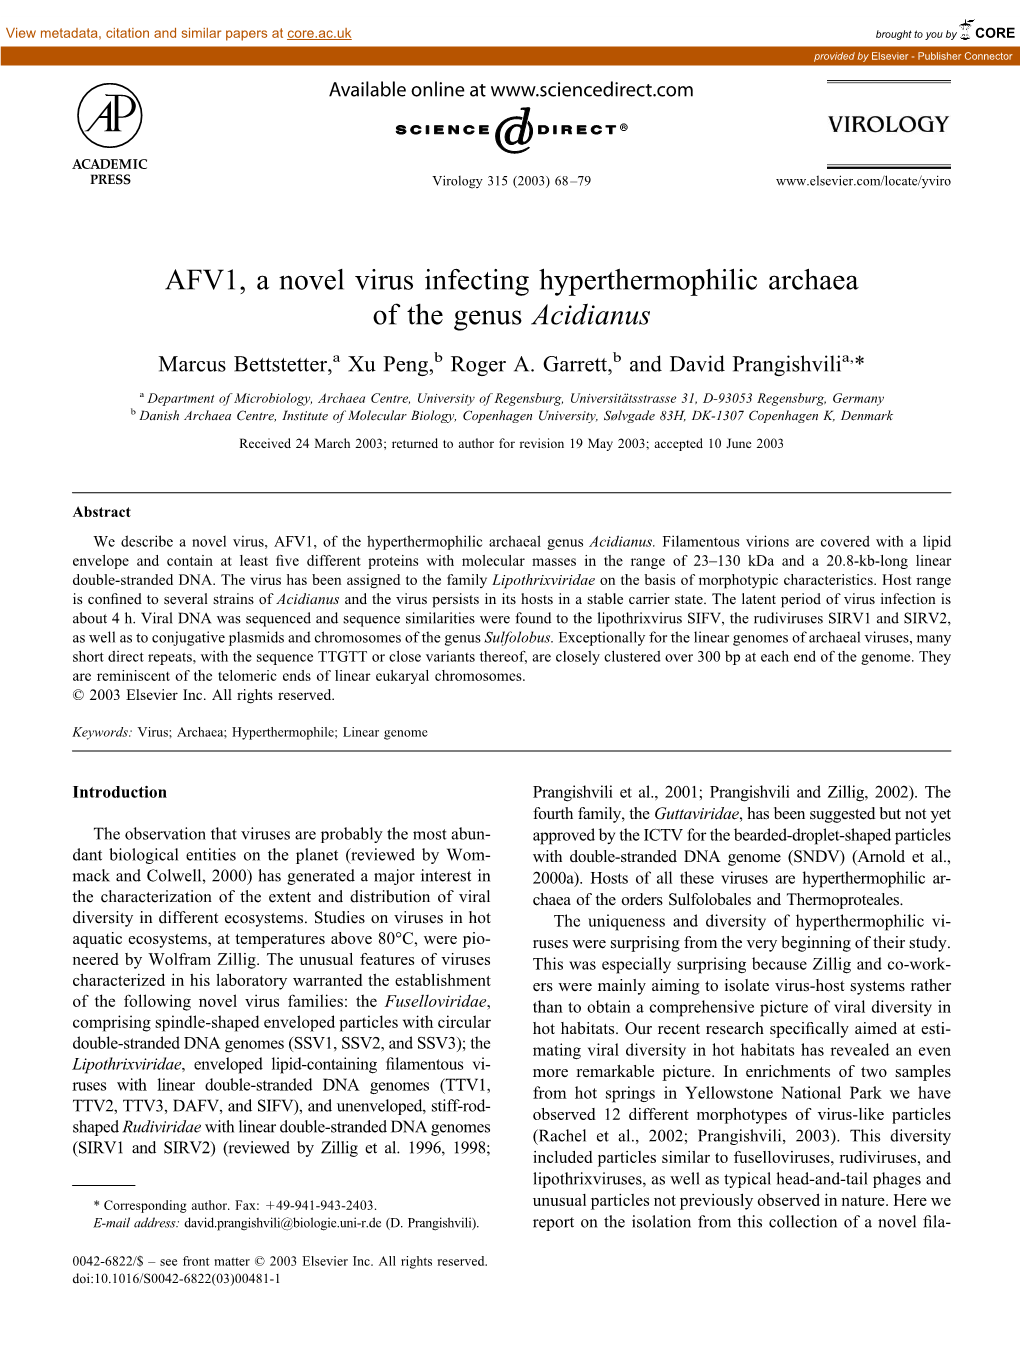 AFV1, a Novel Virus Infecting Hyperthermophilic Archaea of the Genus Acidianus